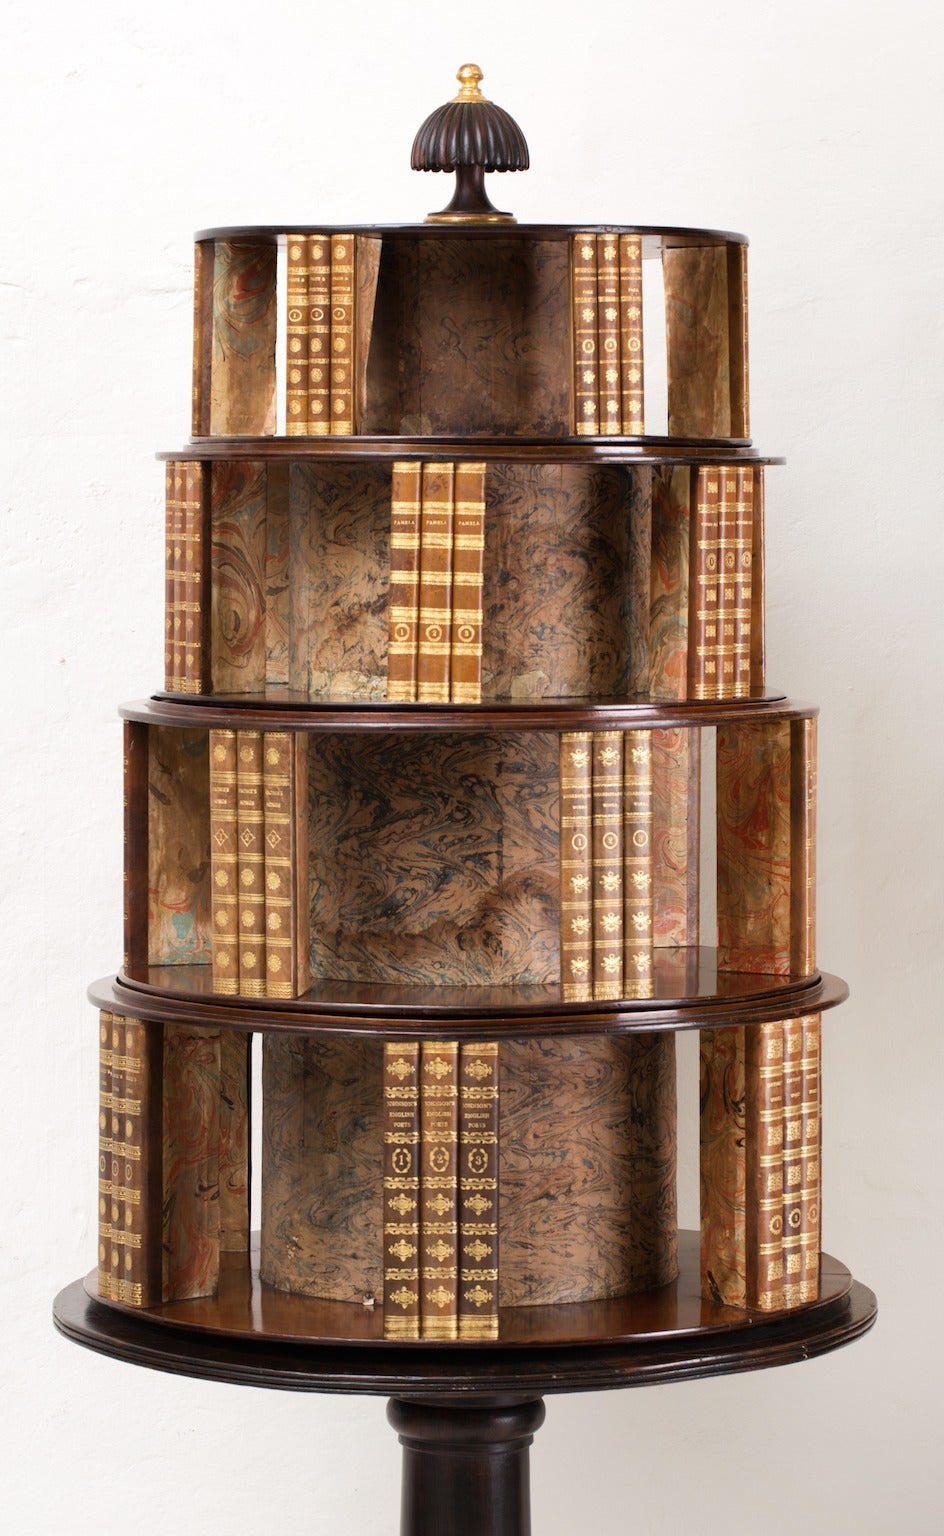 Regency Faux Rosewood and Gilt Book Stands In Excellent Condition For Sale In Banksmeadow, NSW